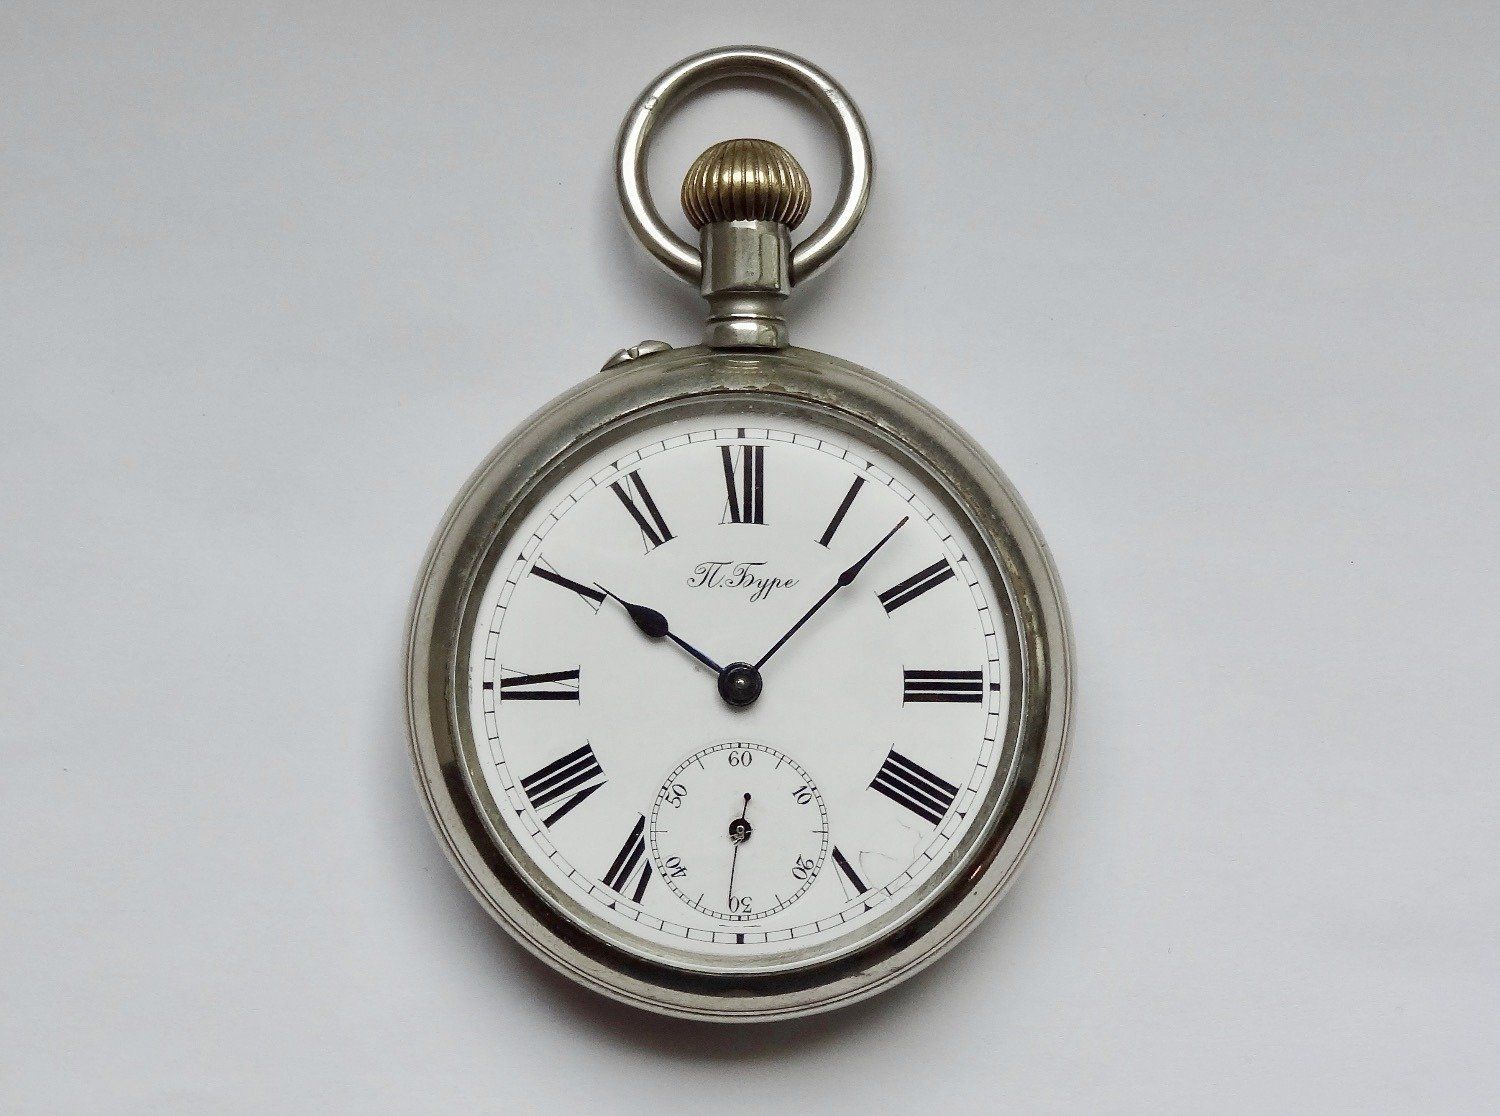 Pavel Buhre Pocket watch from Czarist era. (Courtesy: Dashiell Stanford; https://mroatman.wixsite.com/watches-of-the-ussr)